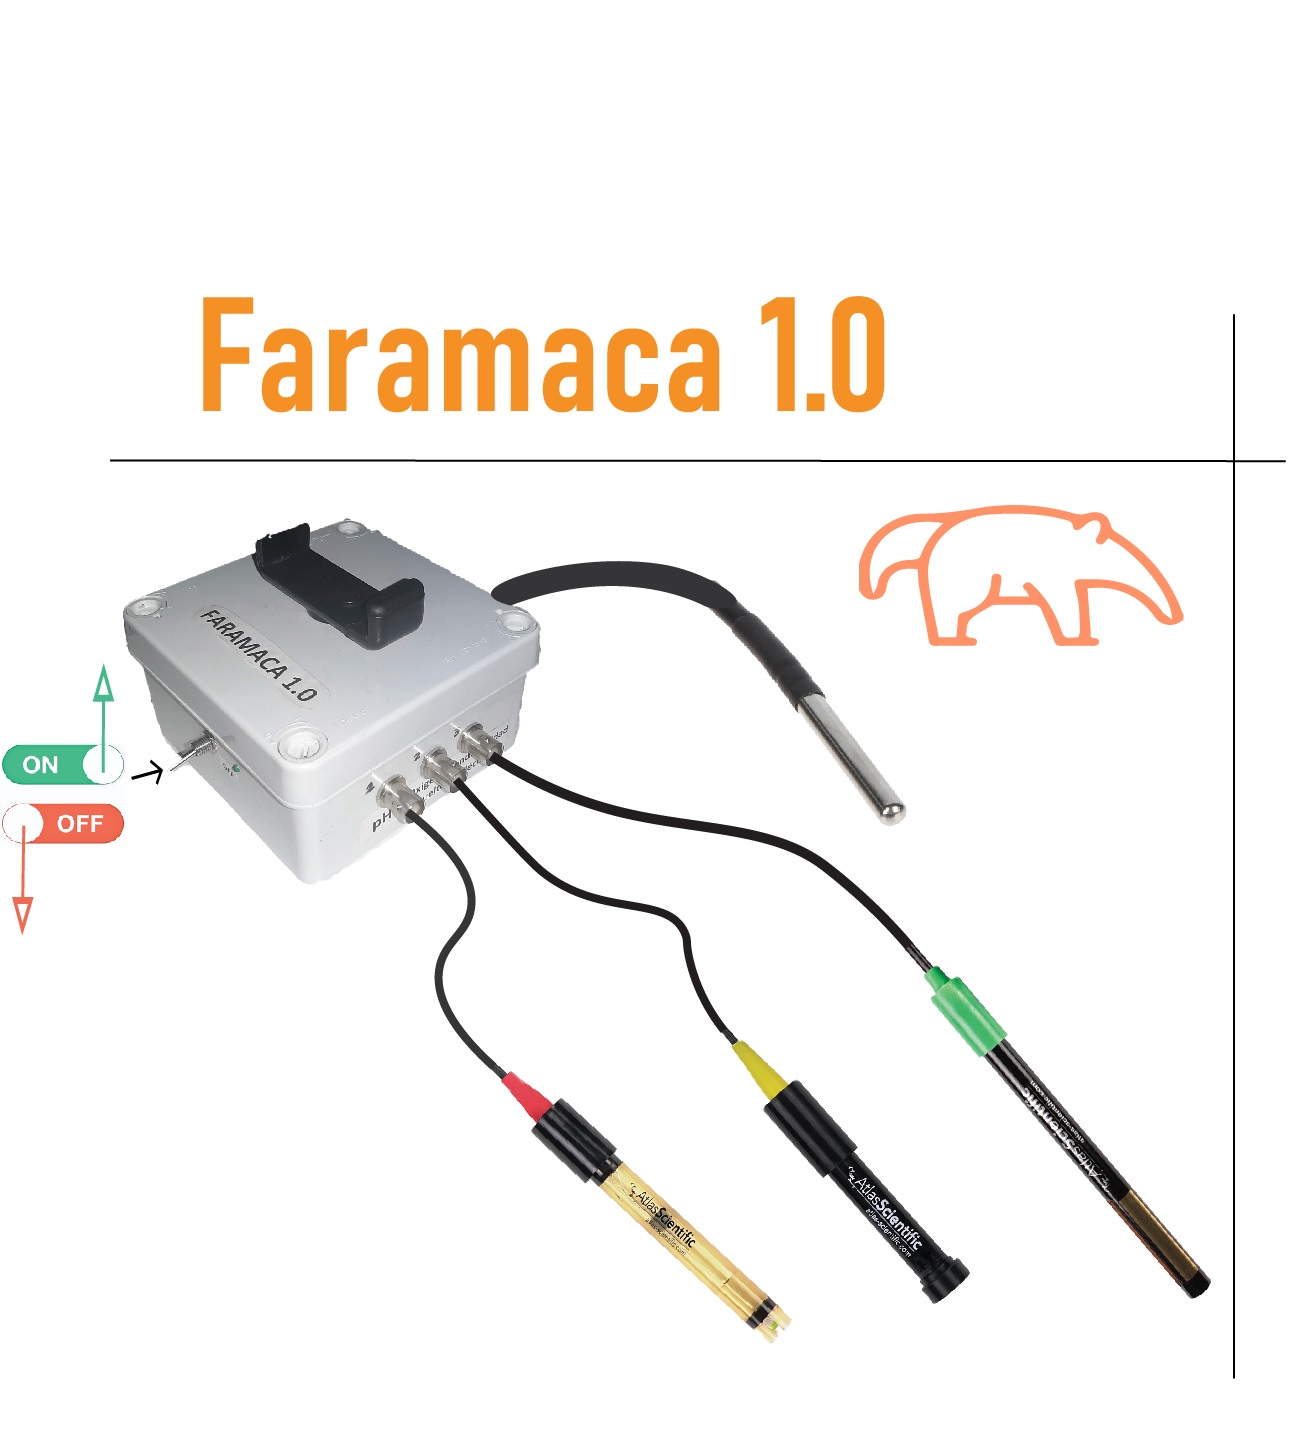 I have a wonderful news. We have made 2 measurement water quality probes. Faramaca water quality probe , and it has 4 sensors pH, OD, EC and Tem...